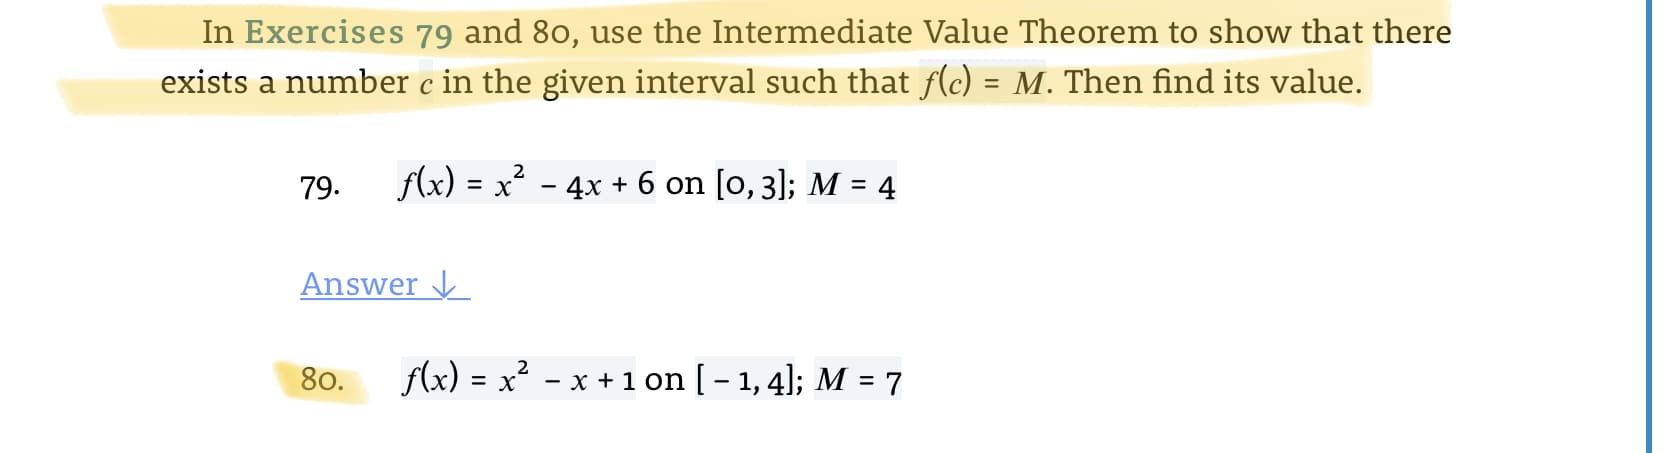 In Exercises 79 and 80, use the Intermediate Value Theorem to show that there
exists a number c in the given interval such that f(c) = M. Then find its value.
79.
f(x) = x? - 4x + 6 on [o, 3); M = 4
Answer
80.
flx) = x? - x + 1 on [ – 1, 4); M = 7
